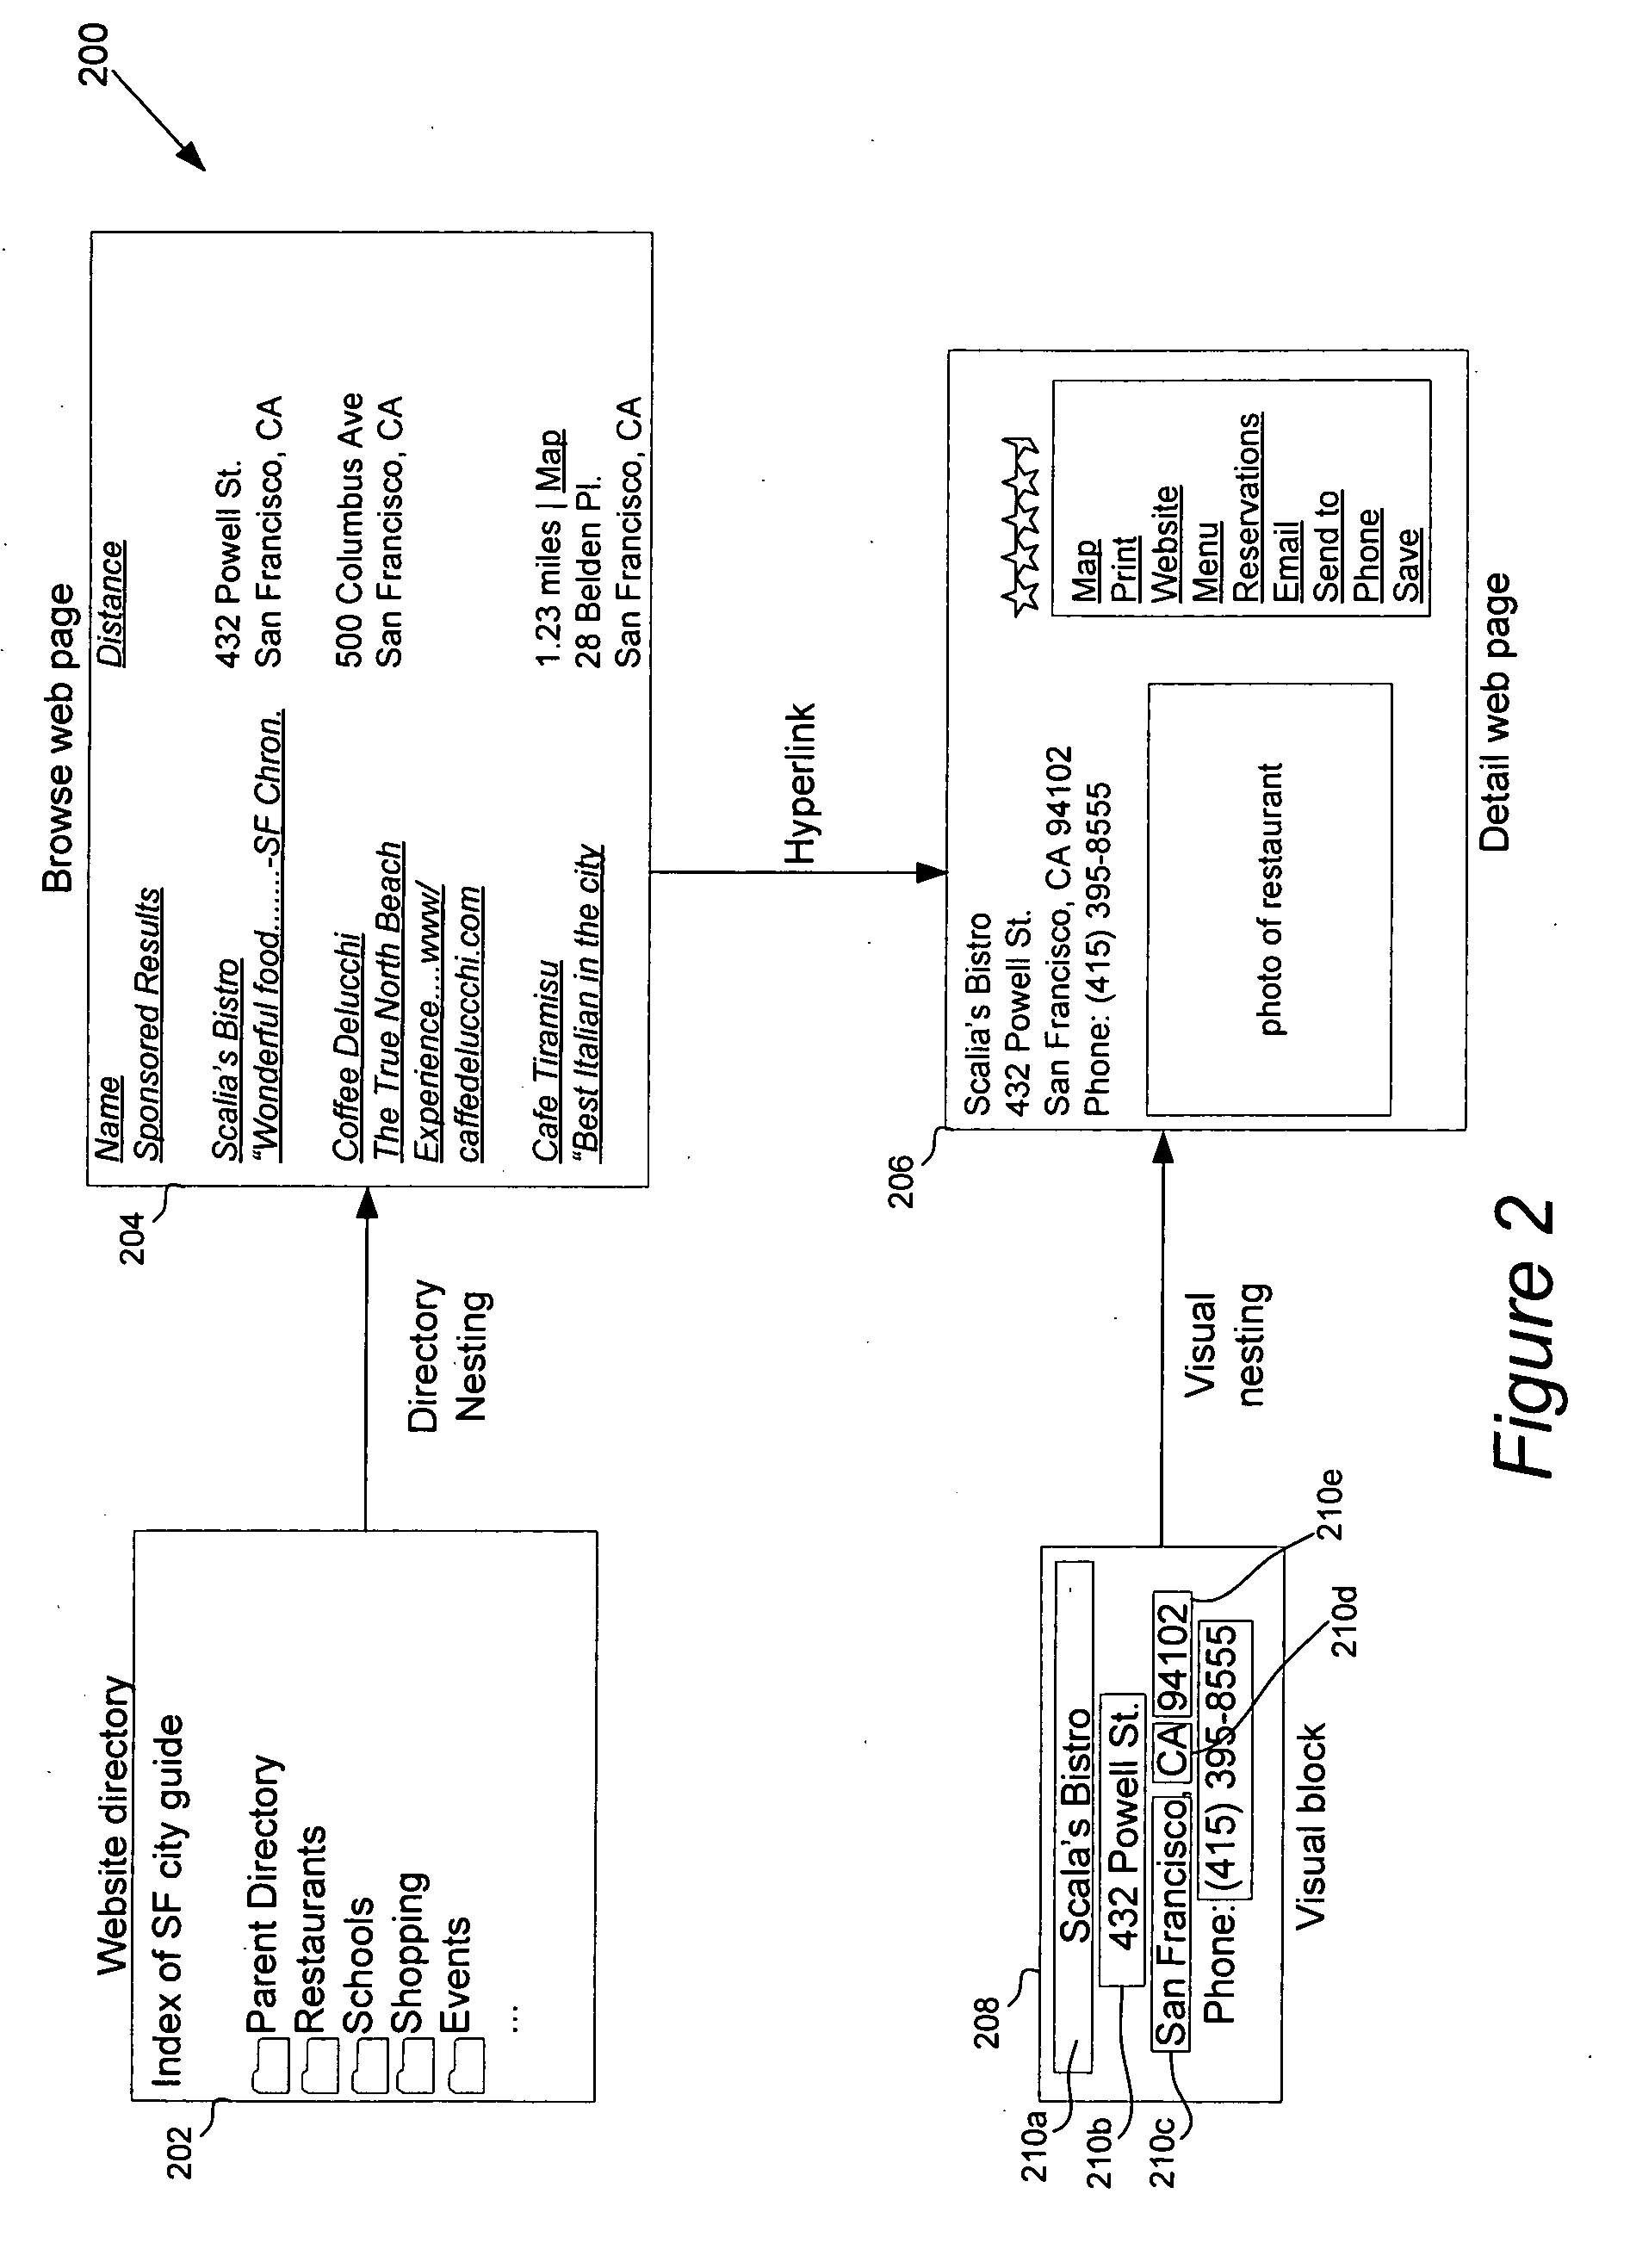 Apparatus and methods for concept-centric information extraction